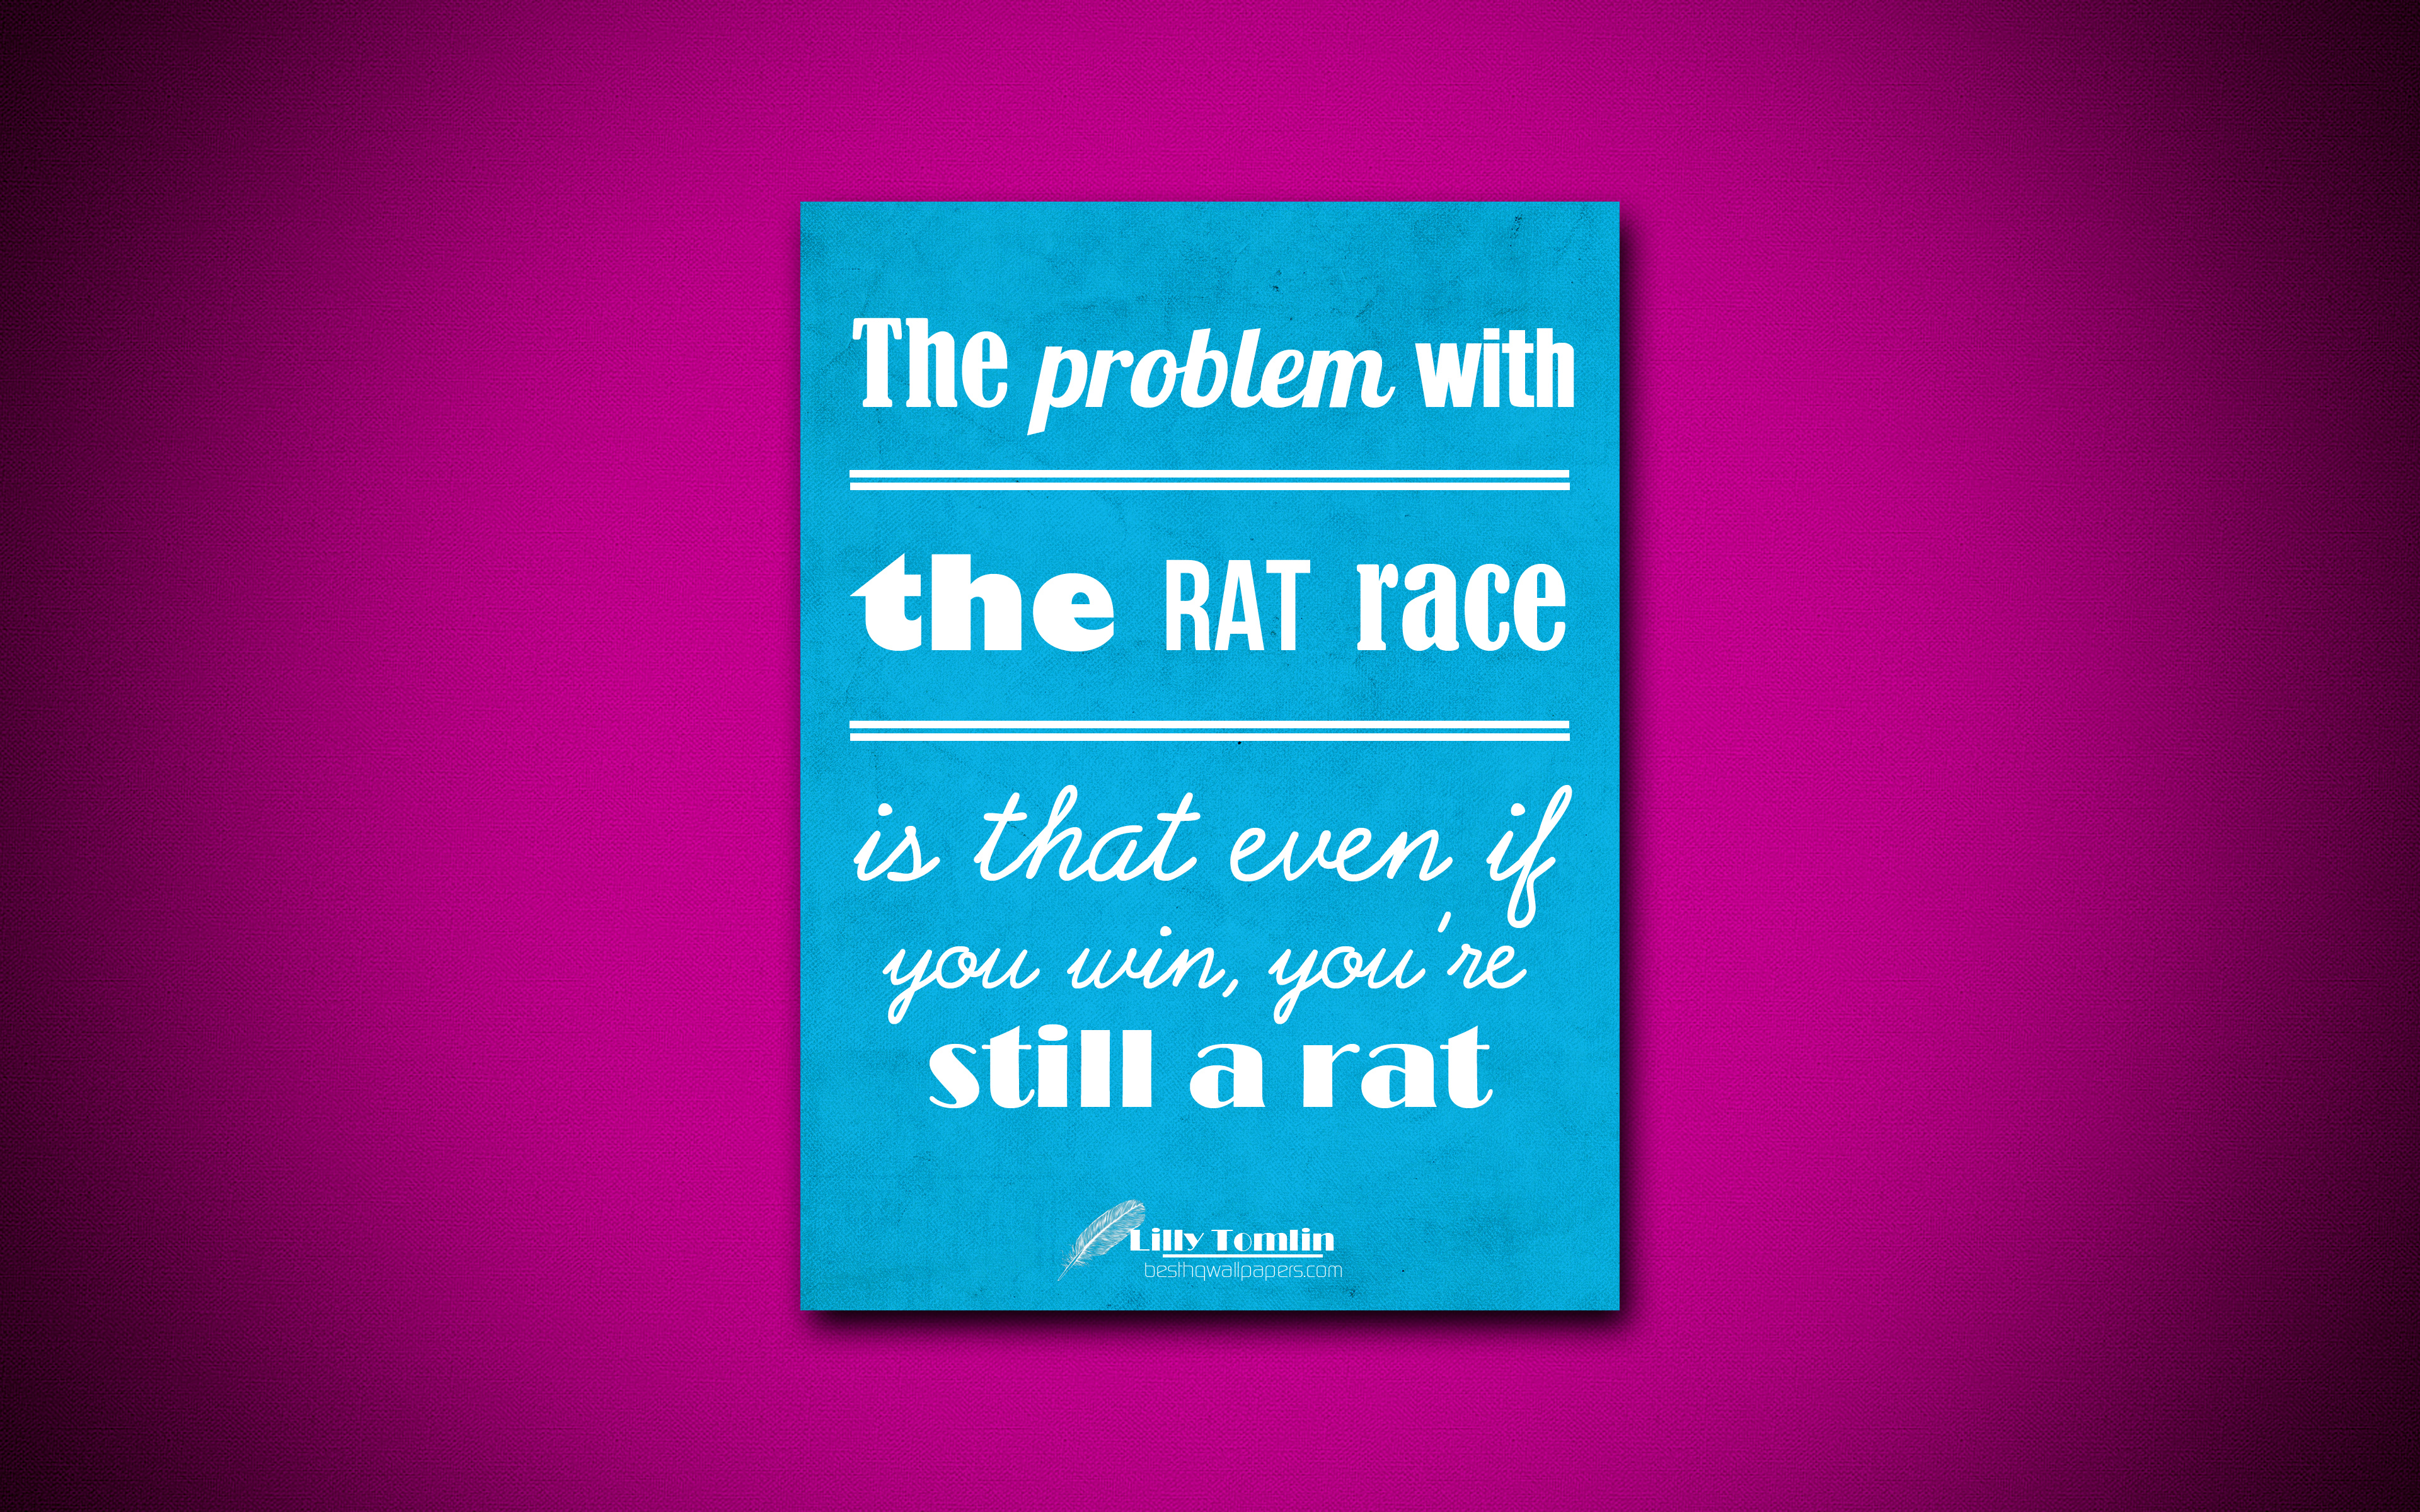 Download wallpaper The problem with the rat race is that even if you win, youre still a rat, 4k, business quotes, Lilly Tomlin, motivation, inspiration for desktop with resolution 3840x2400. High Quality